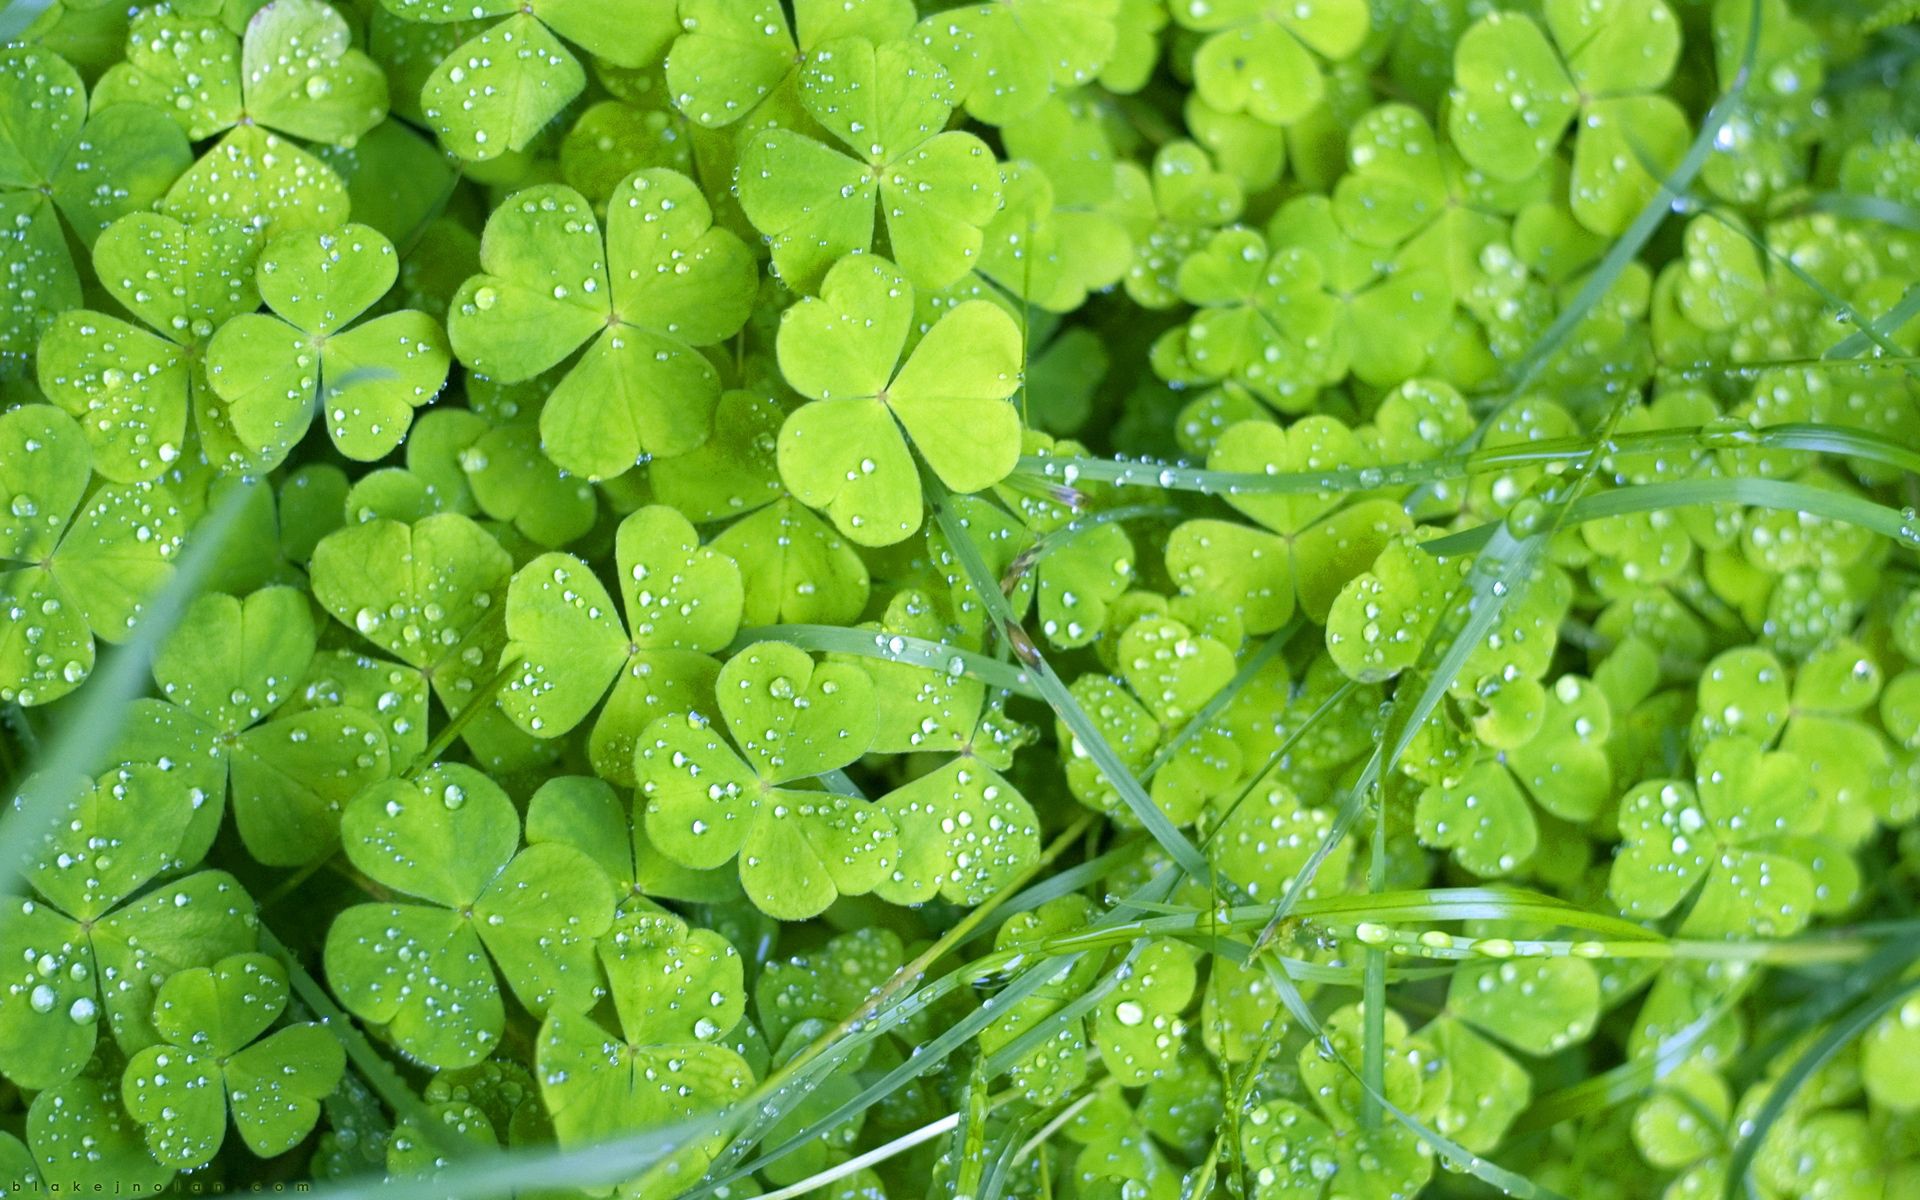 129845 download wallpaper grass, leaves, drops, green, macro, clover screensavers and pictures for free